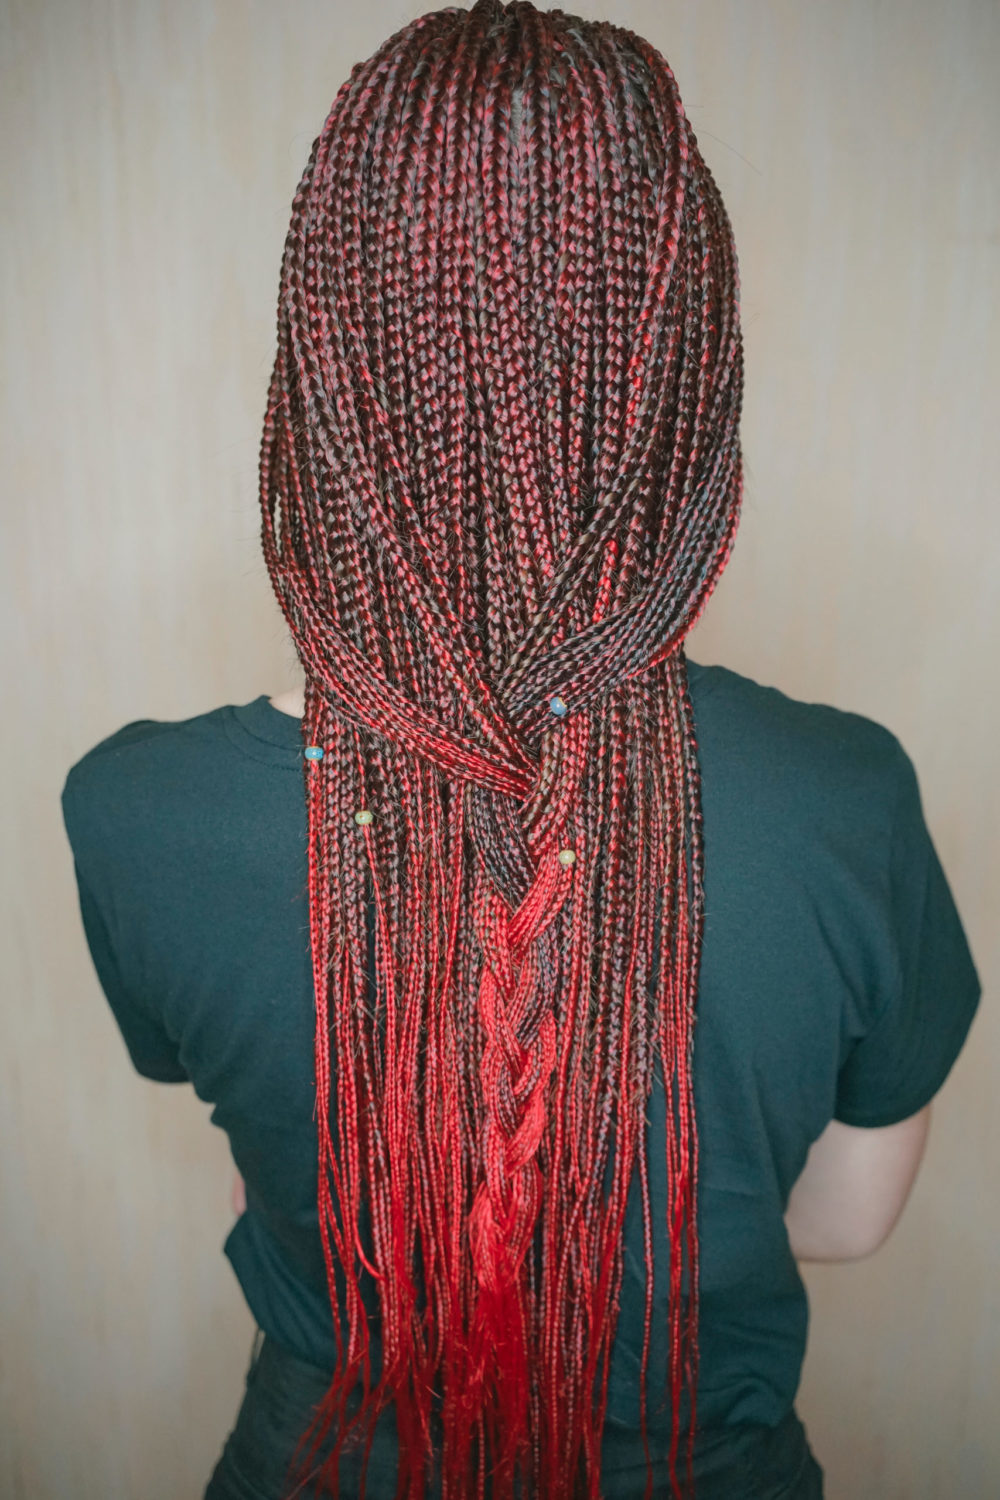 Micro Braids With Grouped Colored Beads